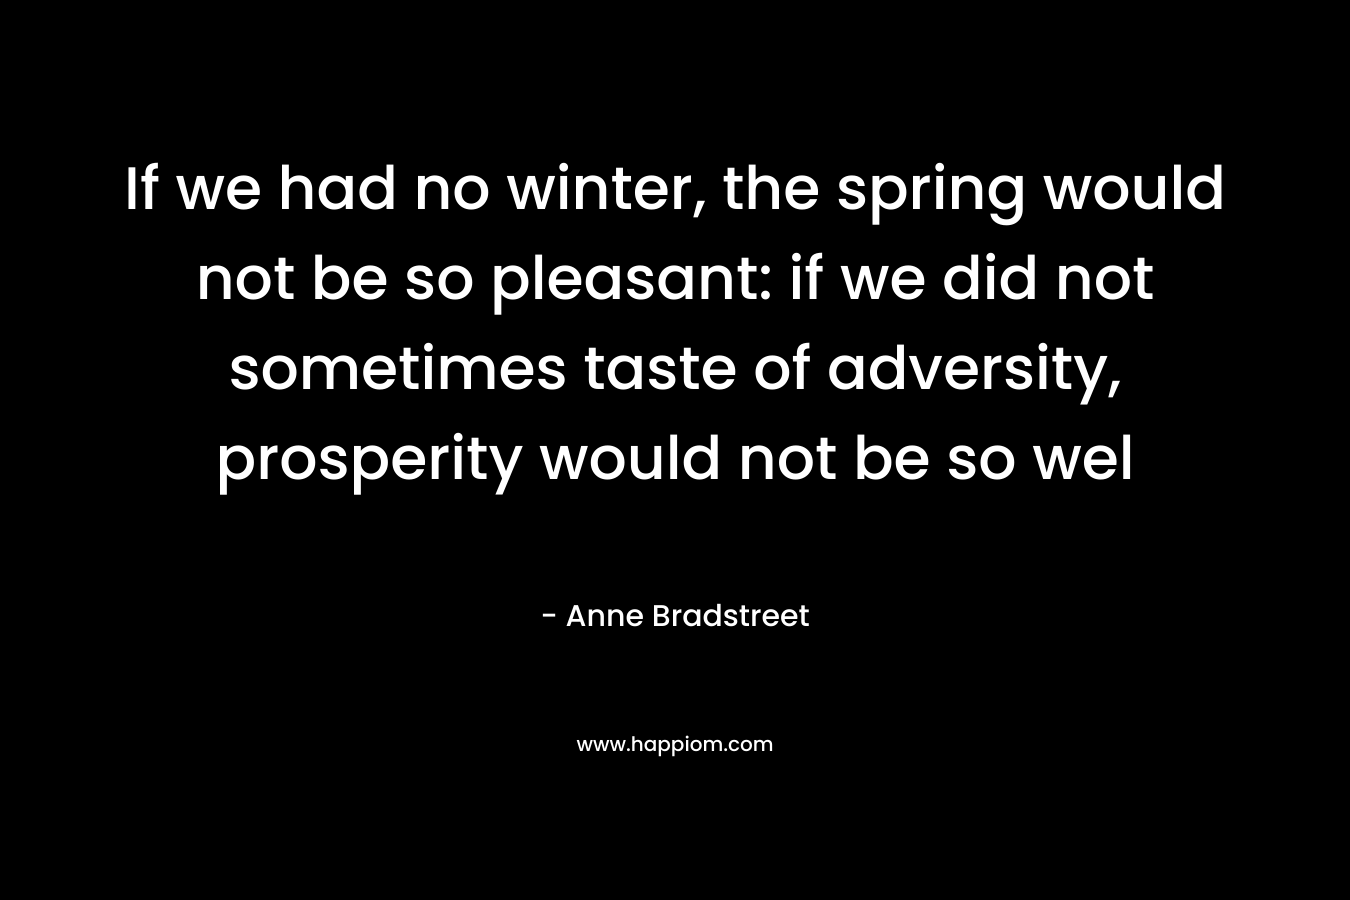 If we had no winter, the spring would not be so pleasant: if we did not sometimes taste of adversity, prosperity would not be so wel